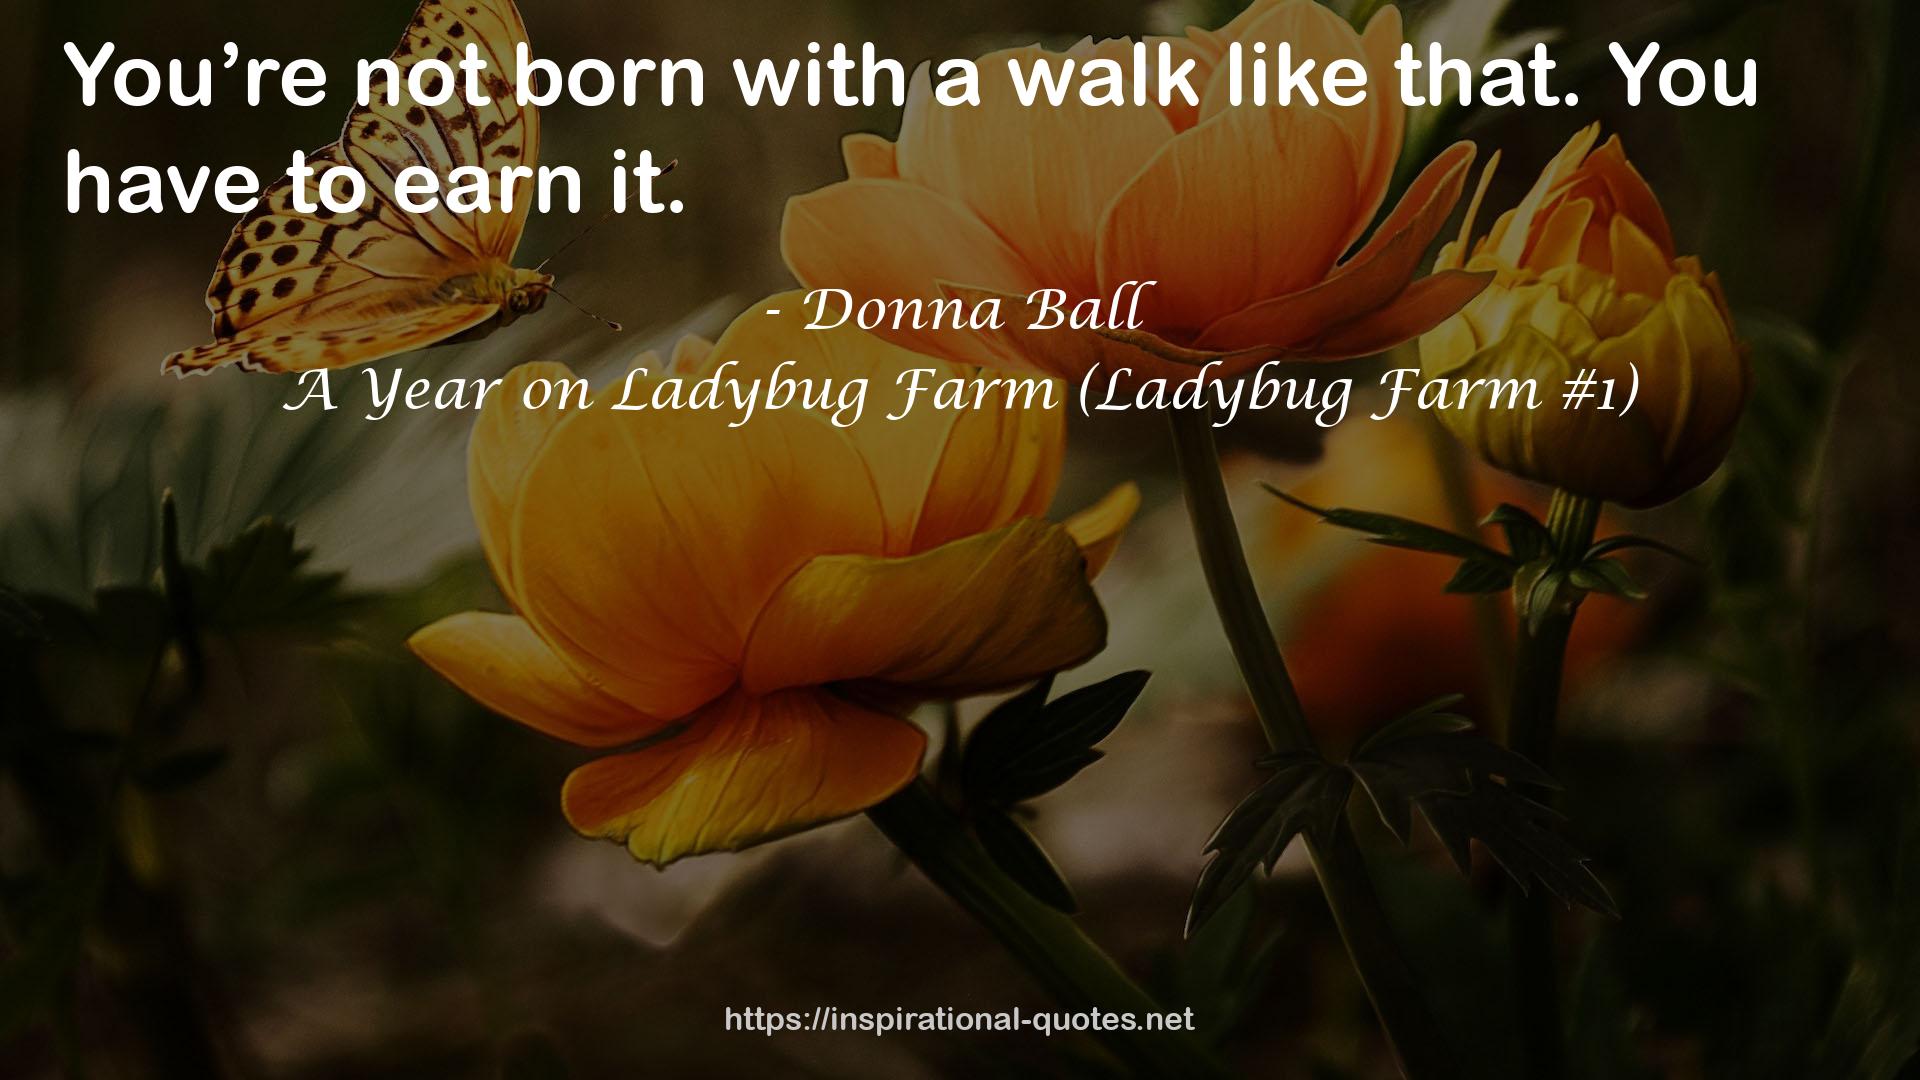 Donna Ball QUOTES